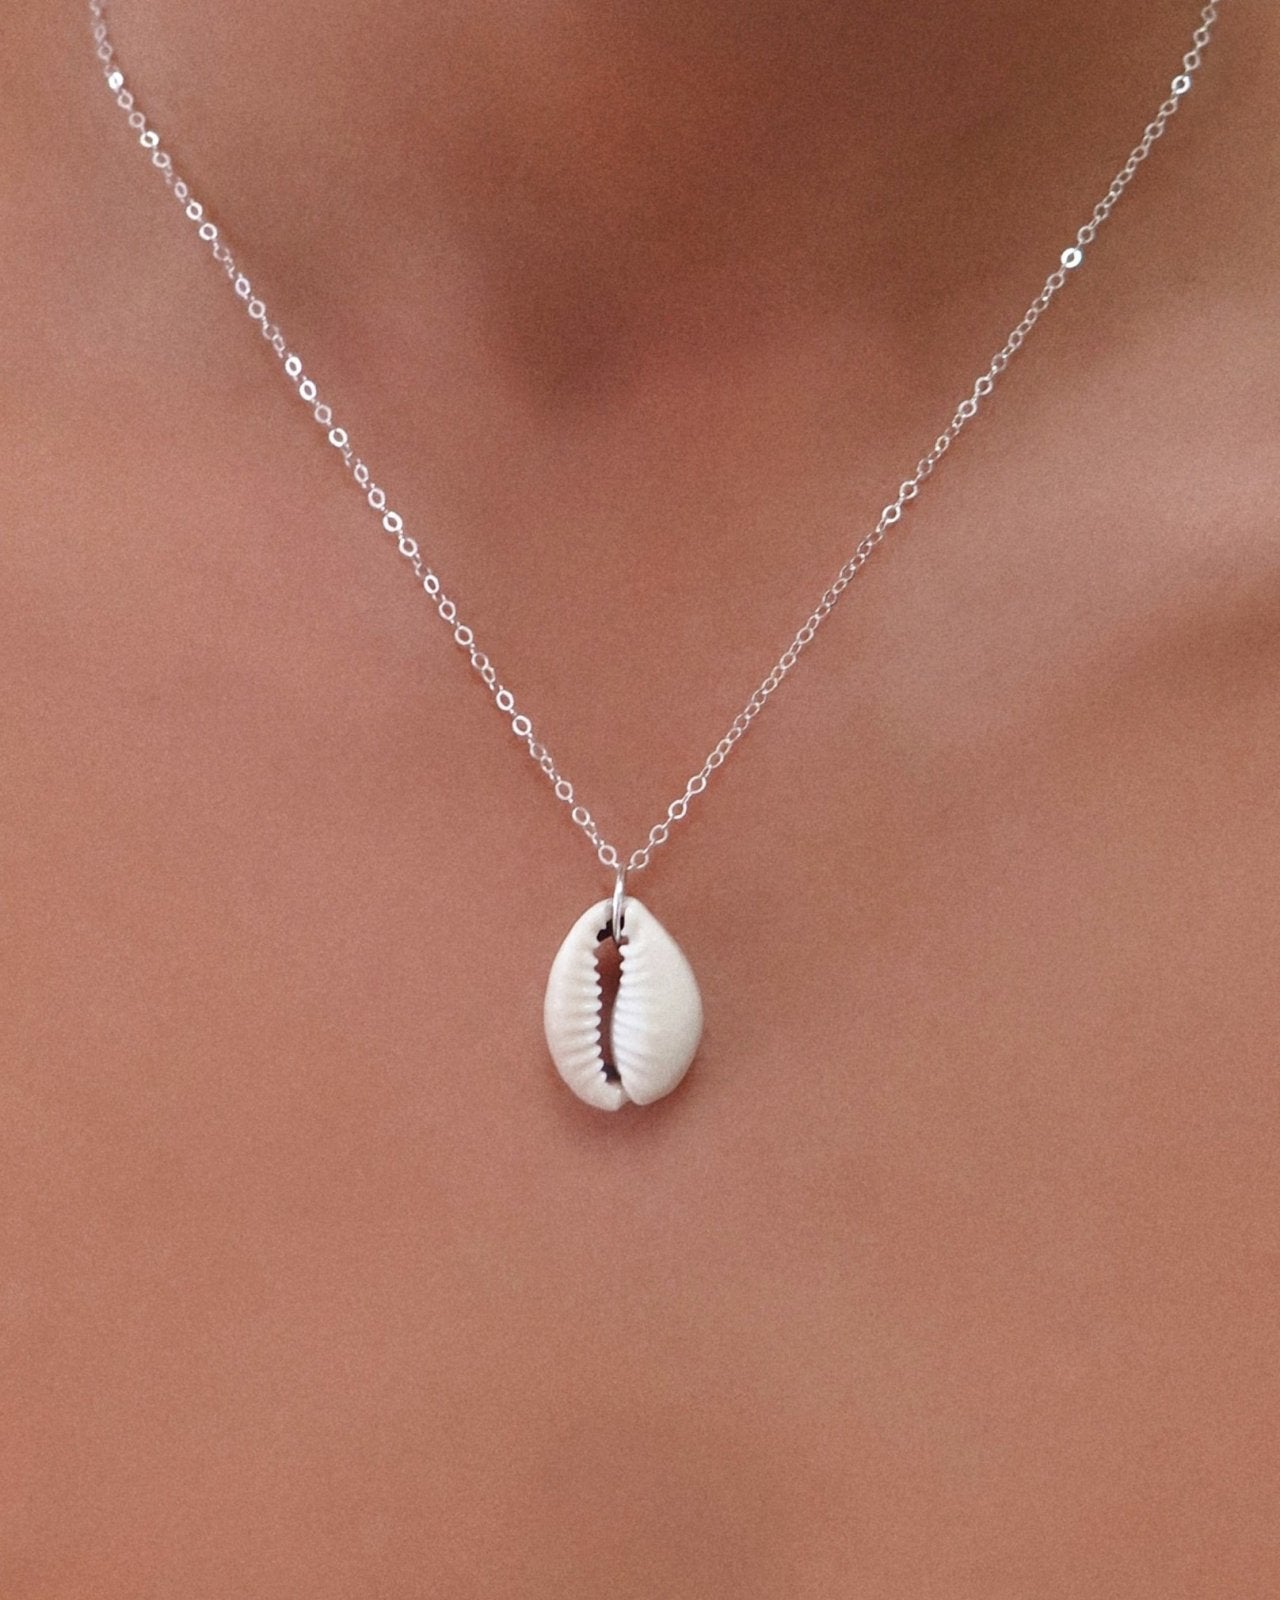 COWRIE SHELL NECKLACE- Sterling Silver - The Littl - Classic Chain - 37cm (choker)